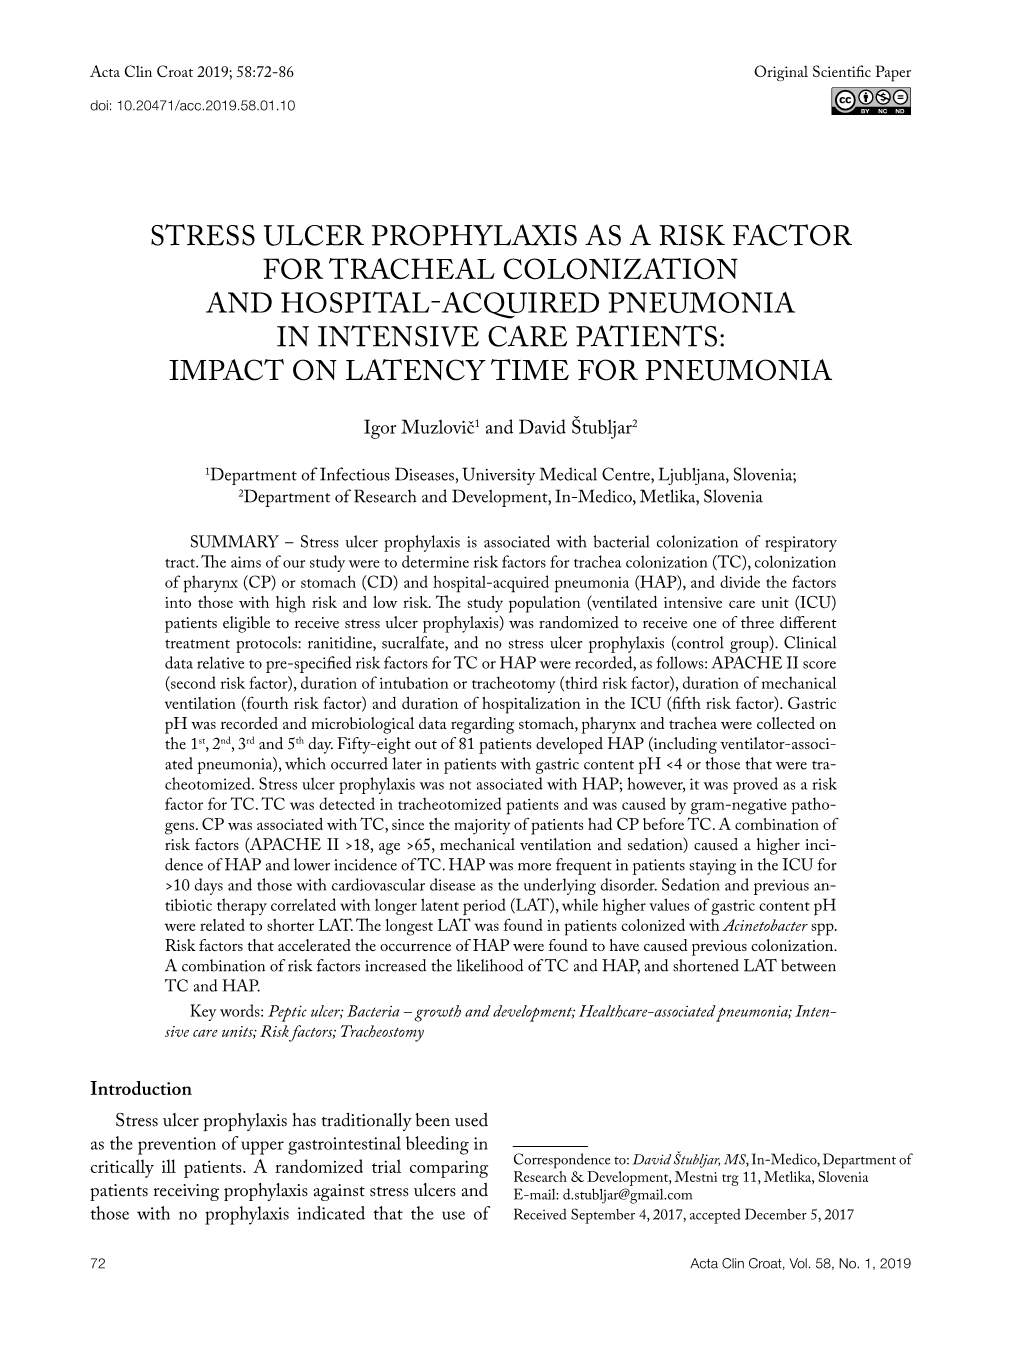 Stress Ulcer Prophylaxis As a Risk Factor for Tracheal Colonization and Hospital-Acquired Pneumonia in Intensive Care Patients: Impact on Latency Time for Pneumonia